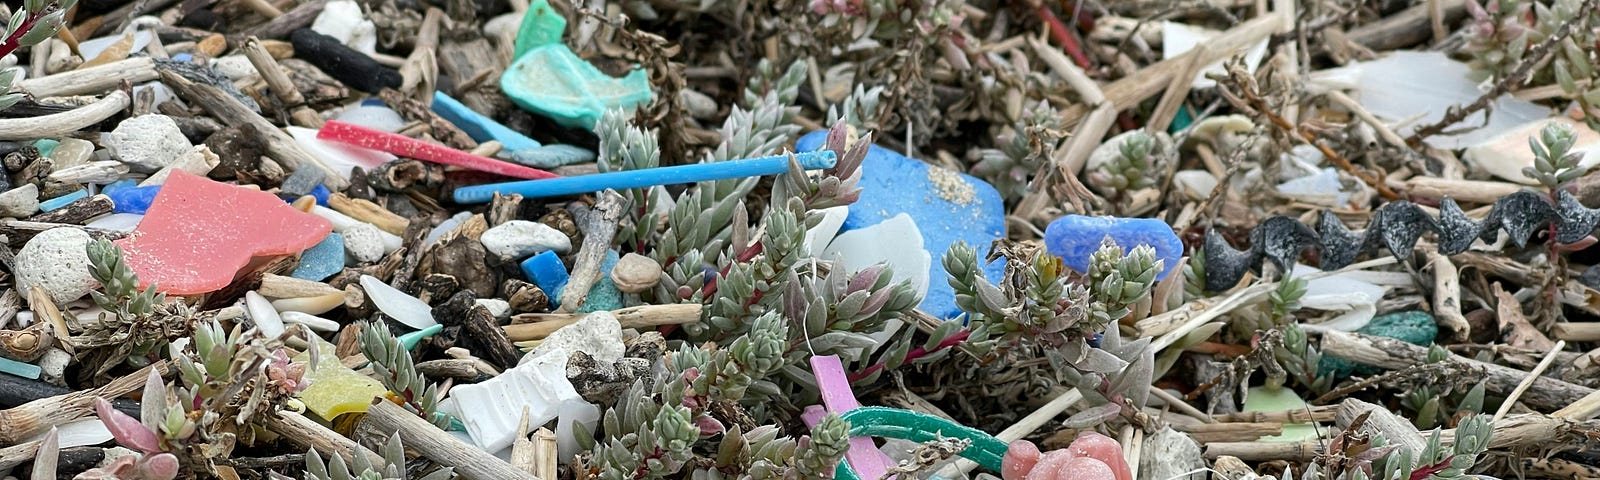 A pile of plastic toys, bleached from the sun, tangled in beach-side plants.